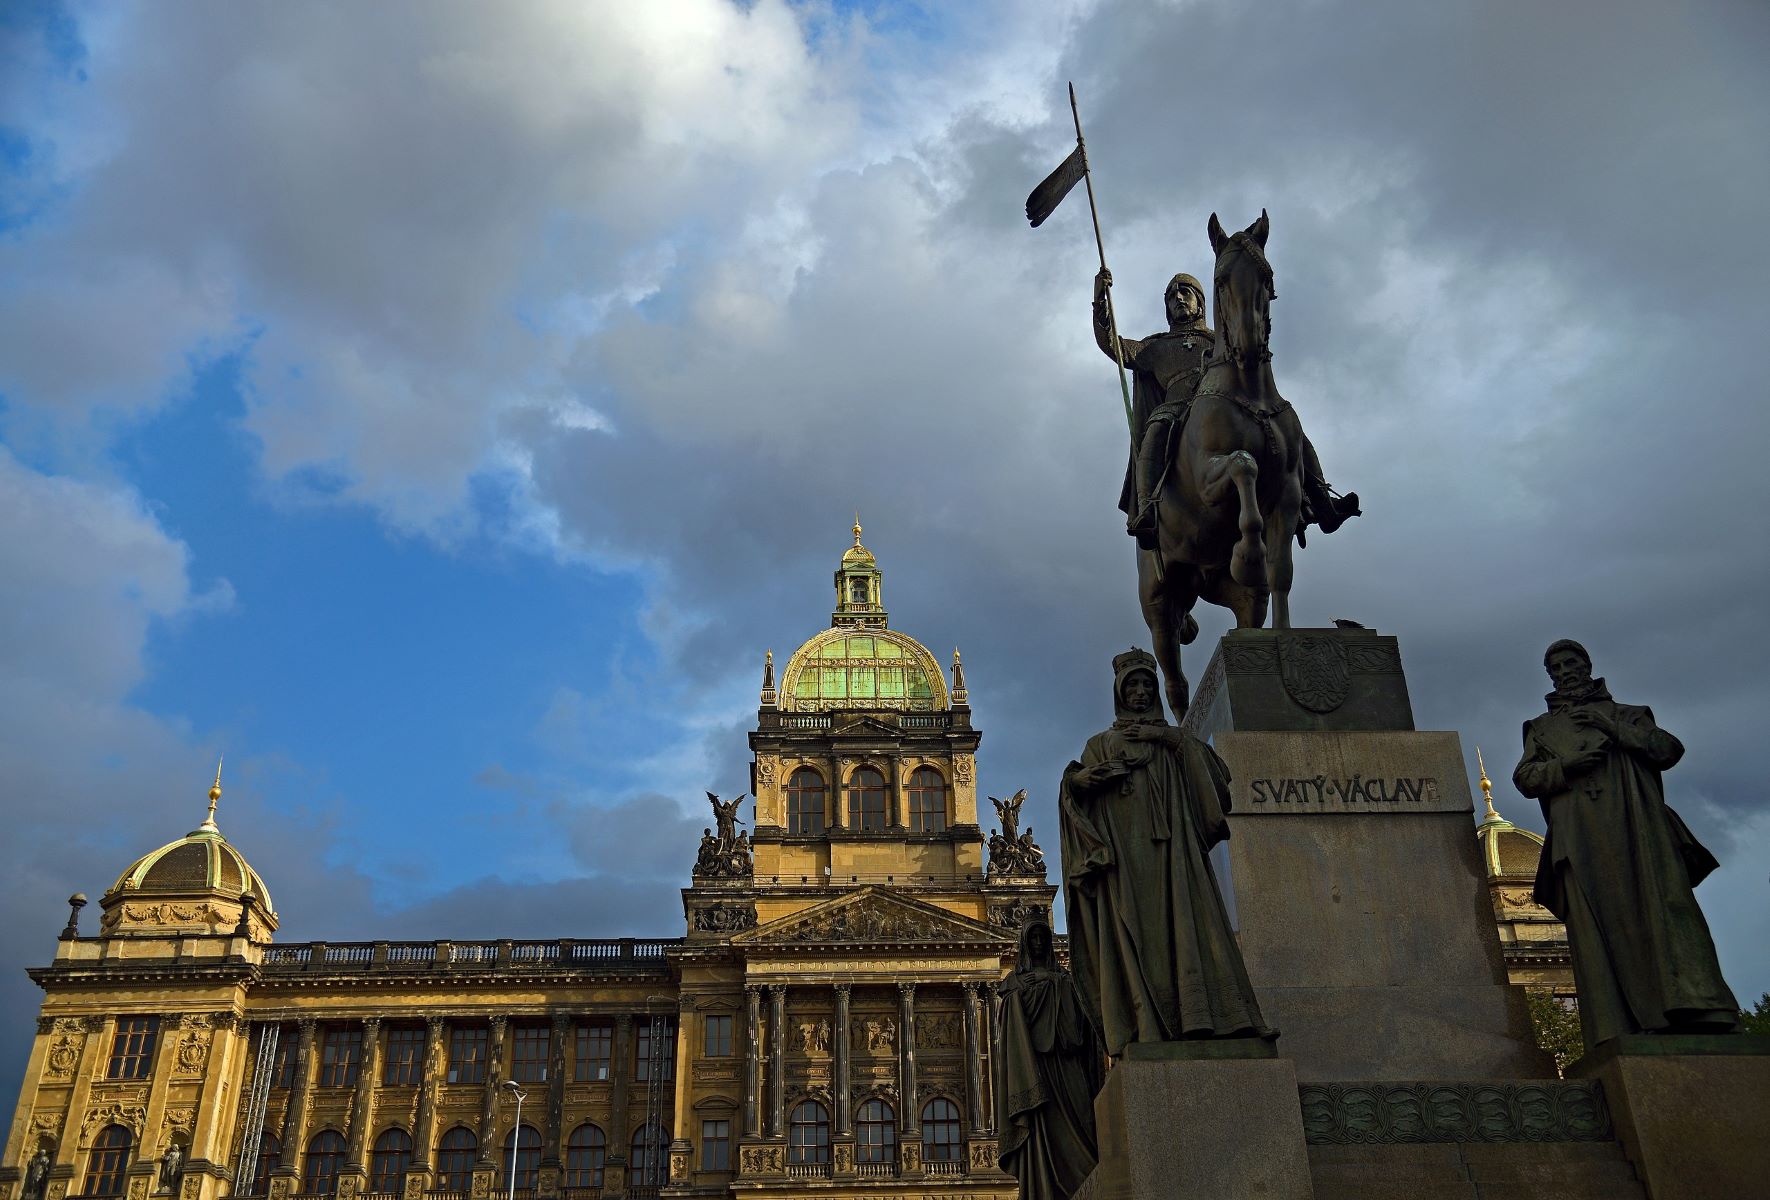 15-extraordinary-facts-about-the-st-wenceslas-statue